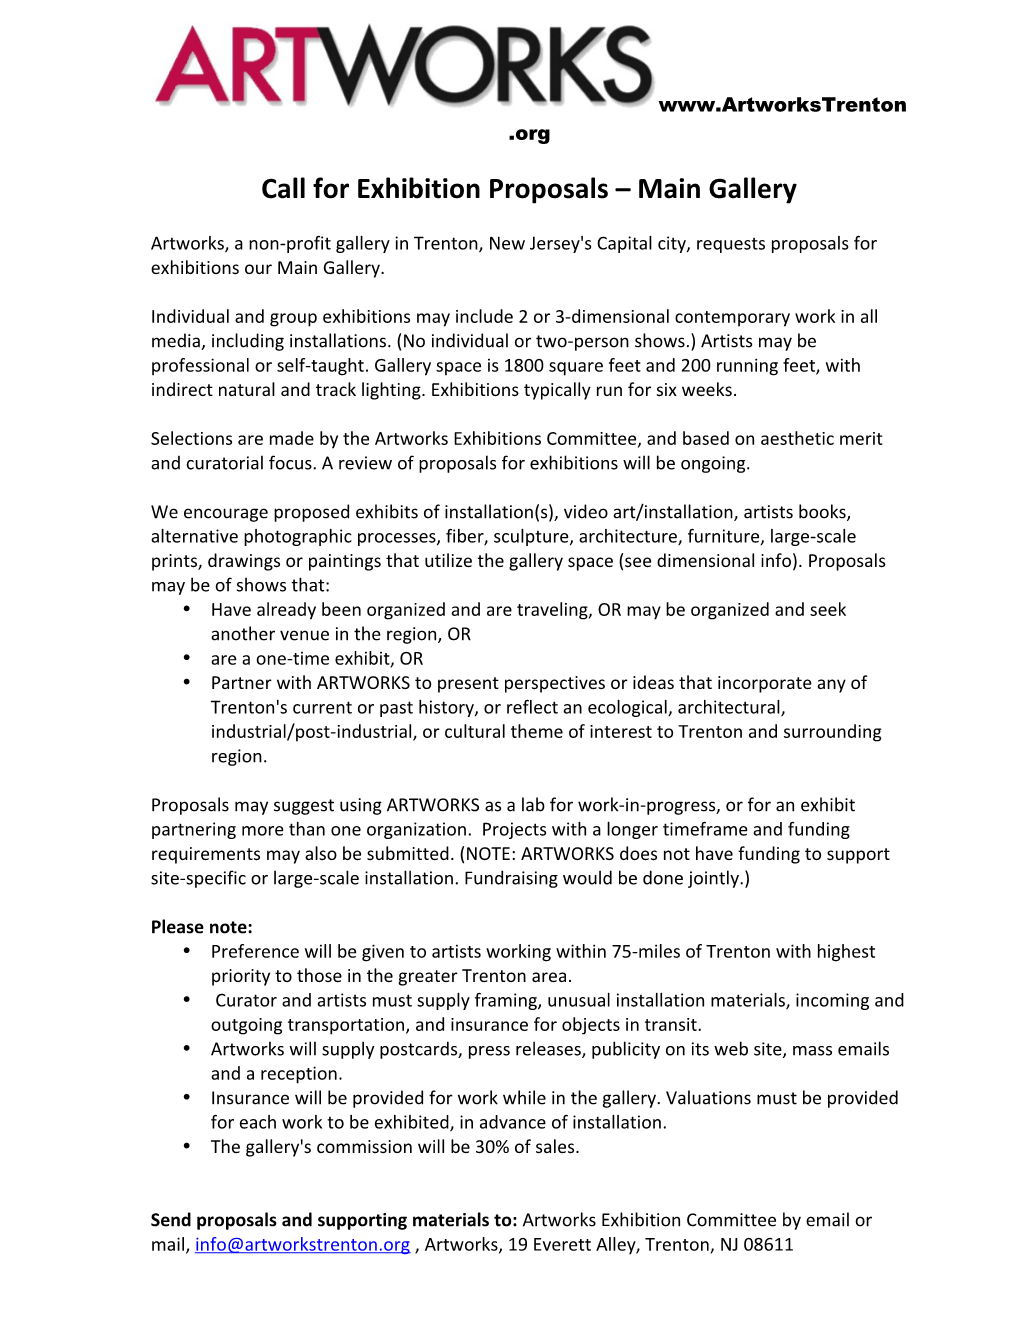 Call for Exhibition Proposals Main Gallery